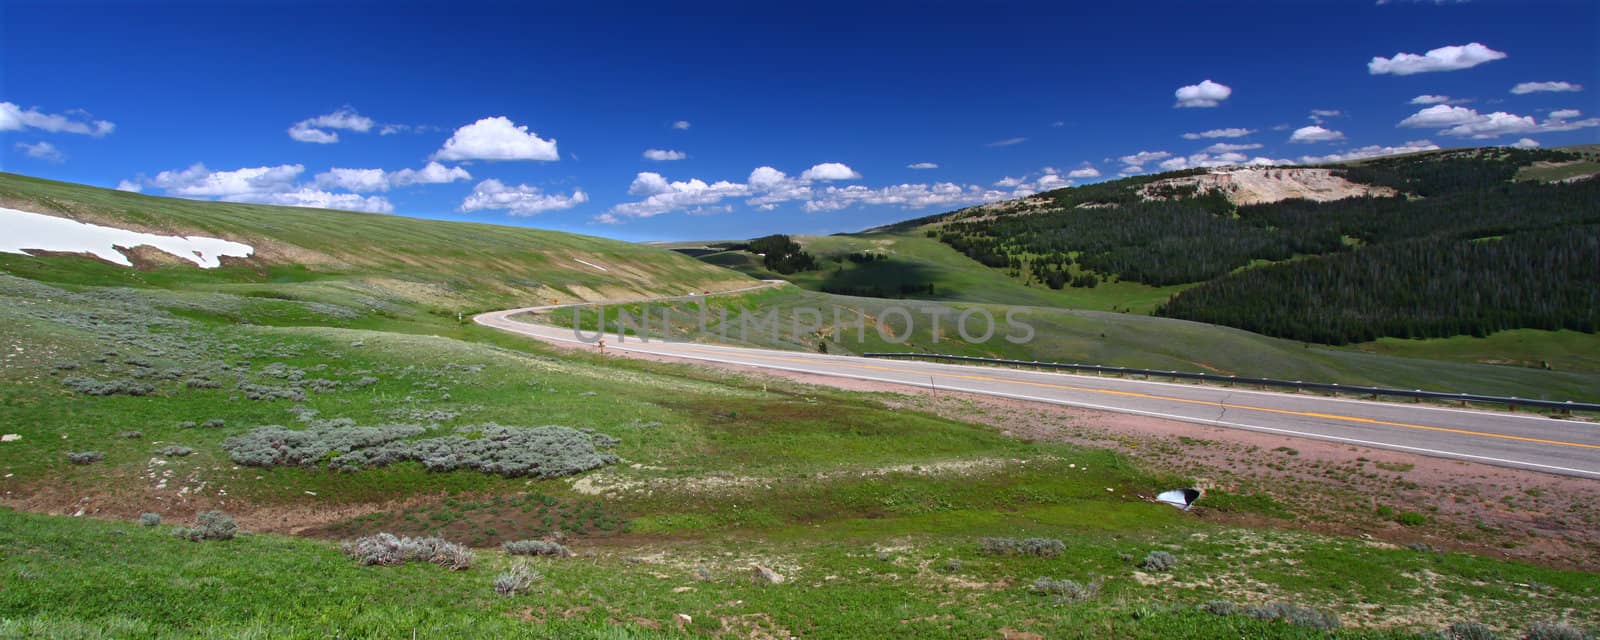 Bighorn National Forest Roadway by Wirepec